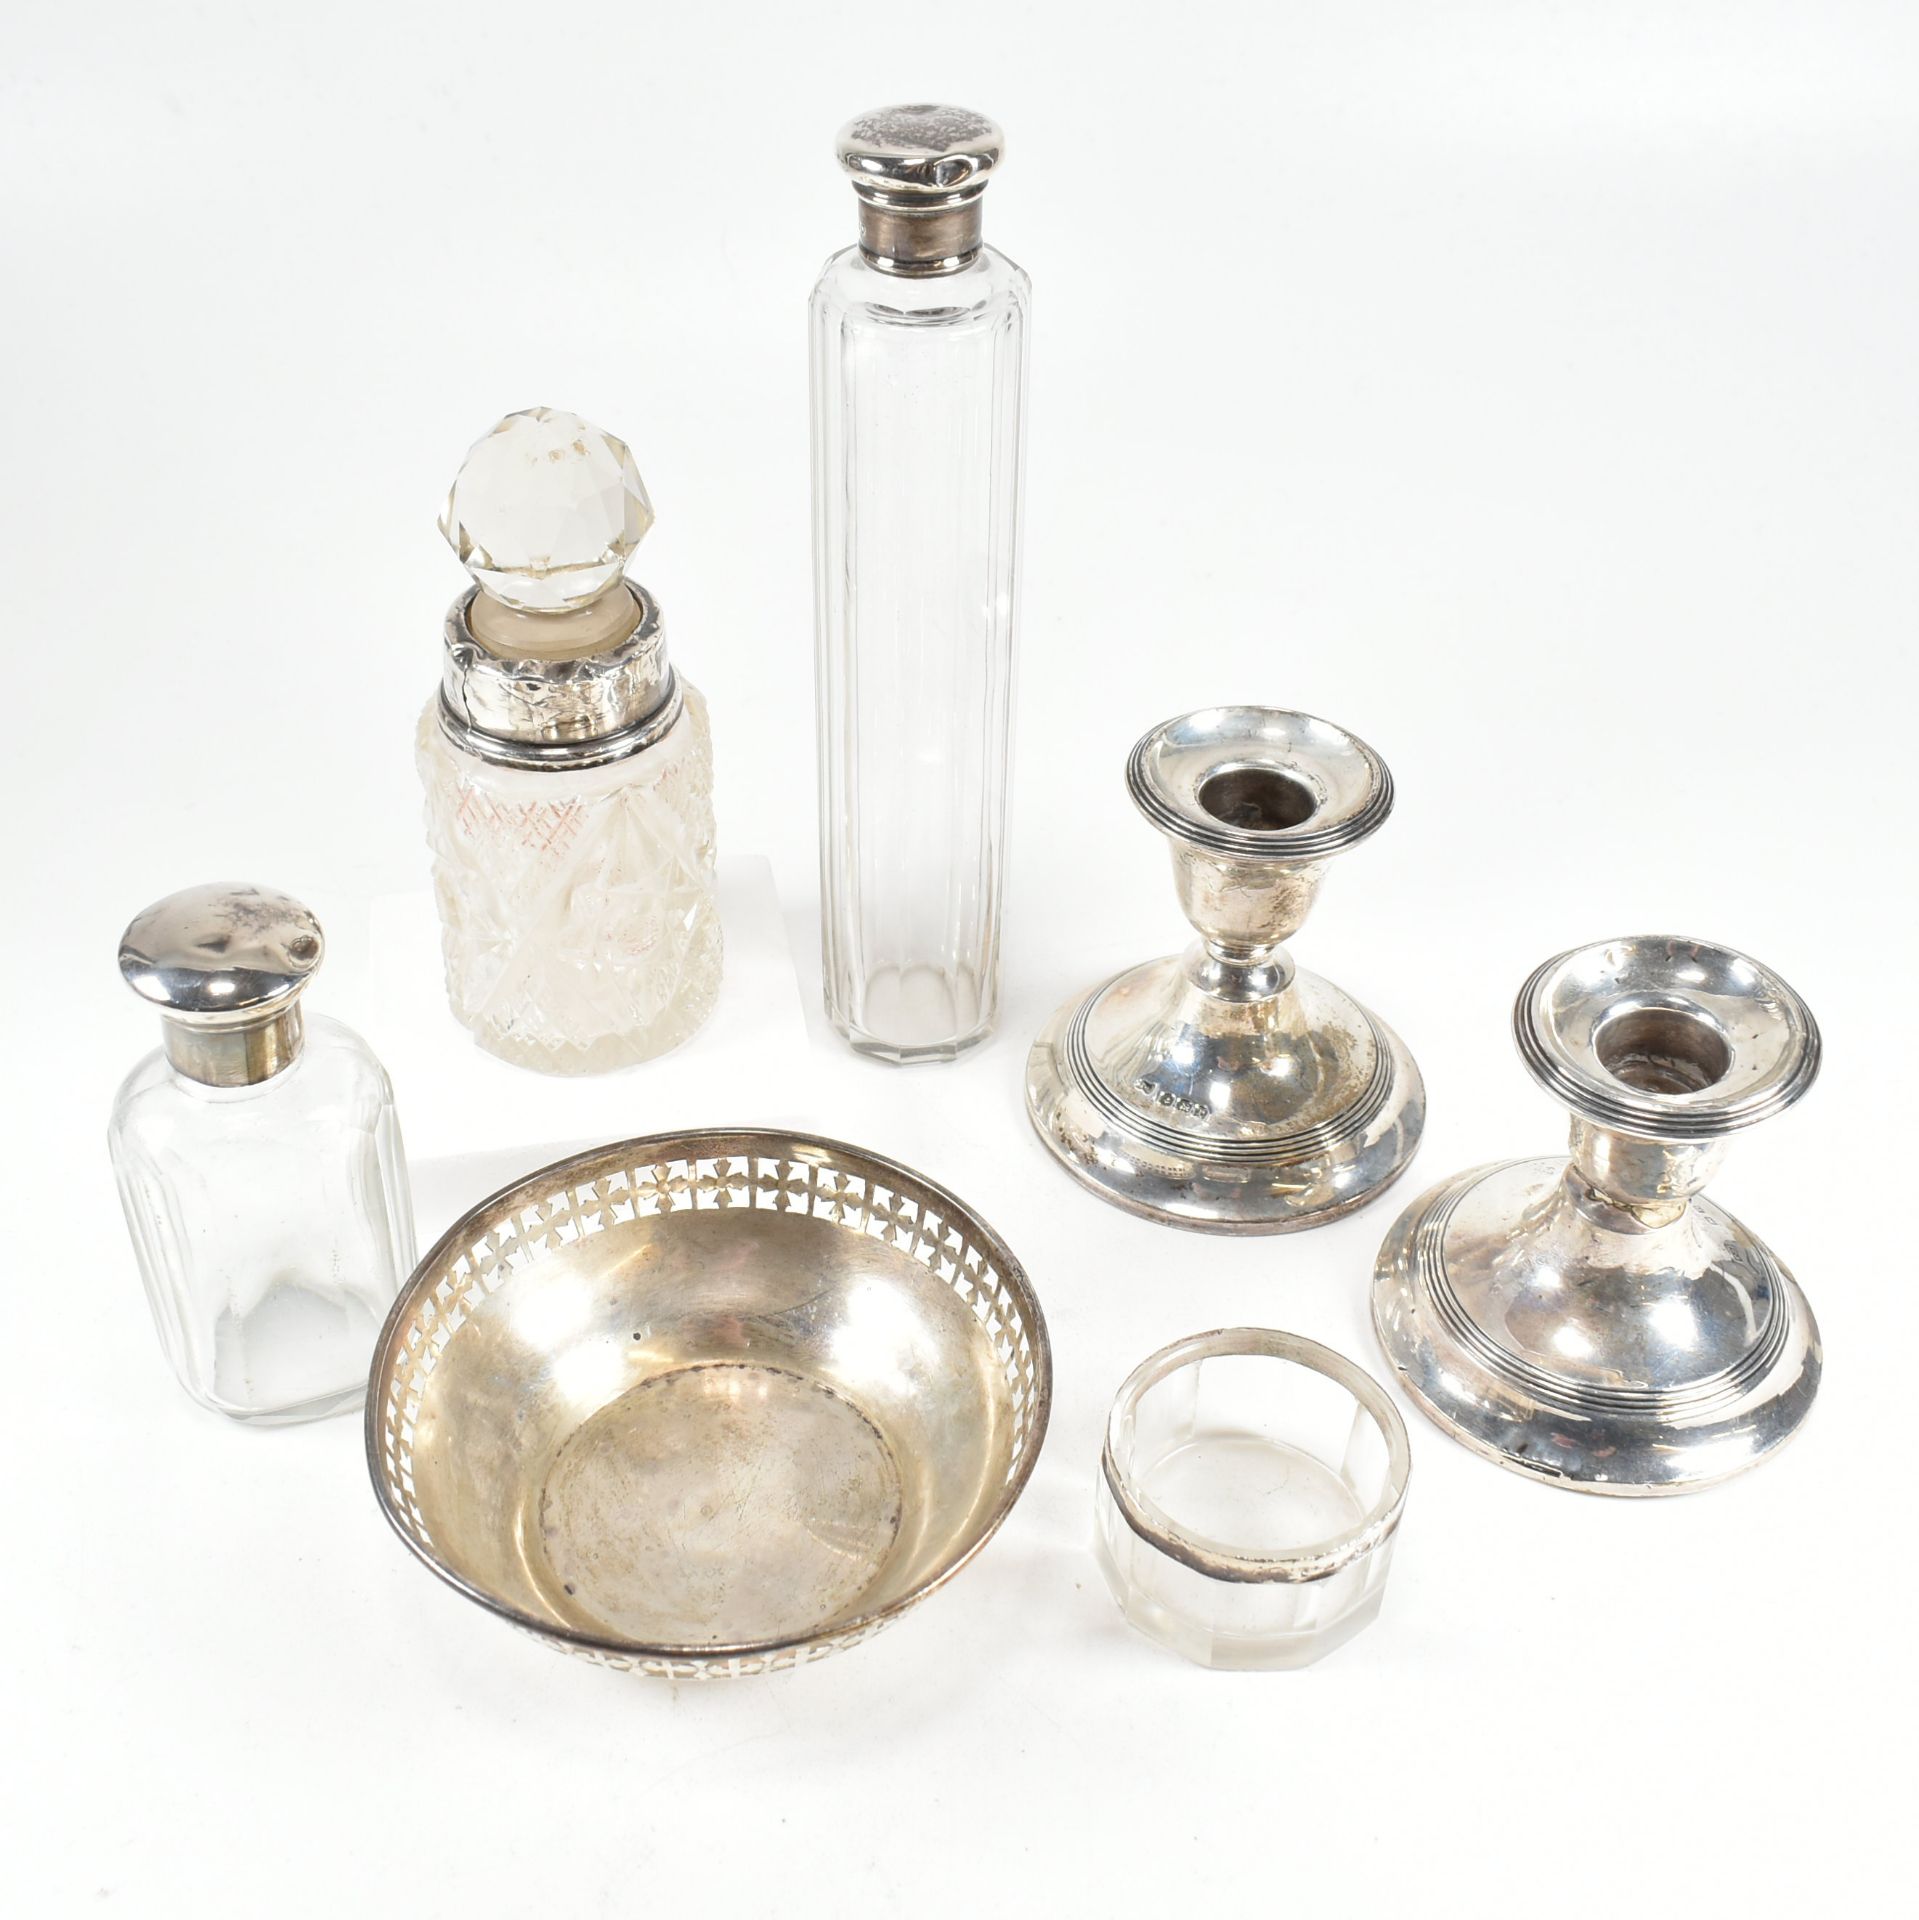 20TH CENTURY HALLMARKED SILVER & SILVER MOUNTED ITEMS